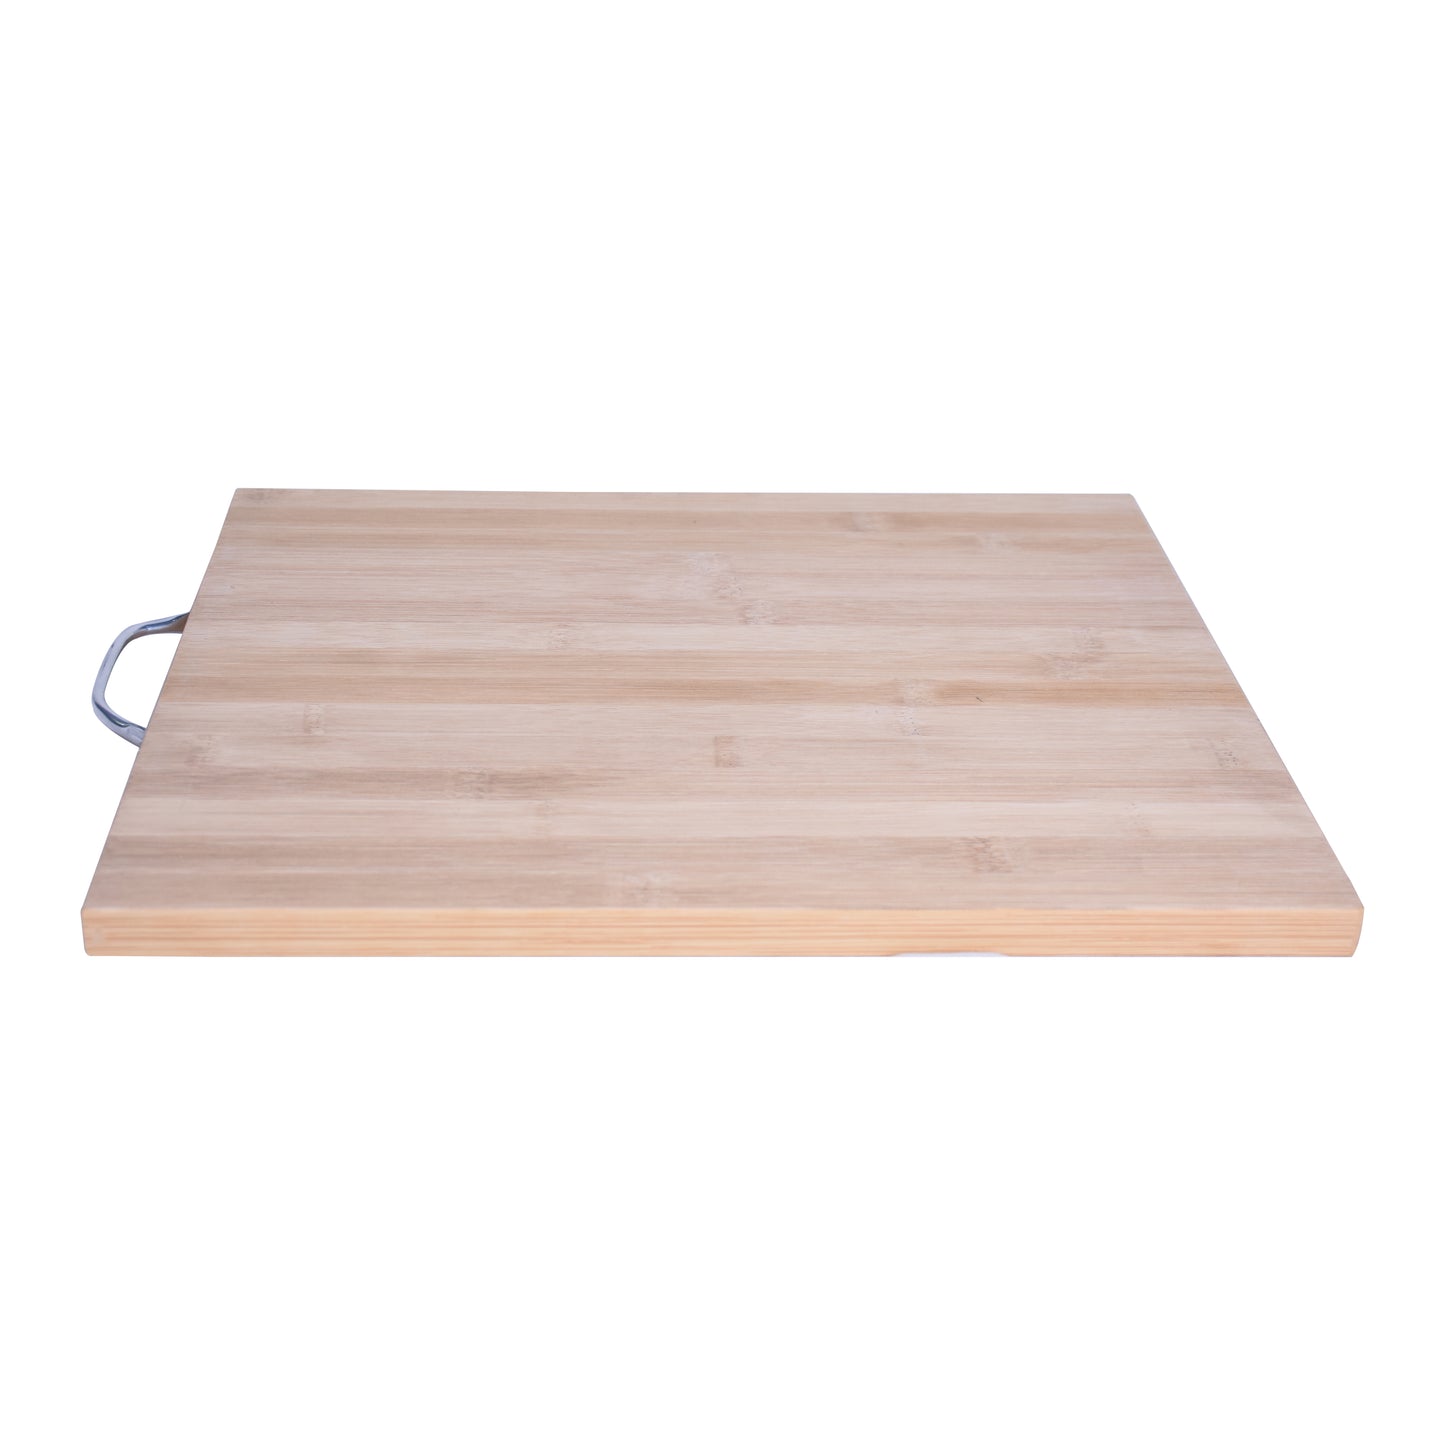 Vegetable Meat Wooden Cutting Chopping Board 35.5 x 26cm